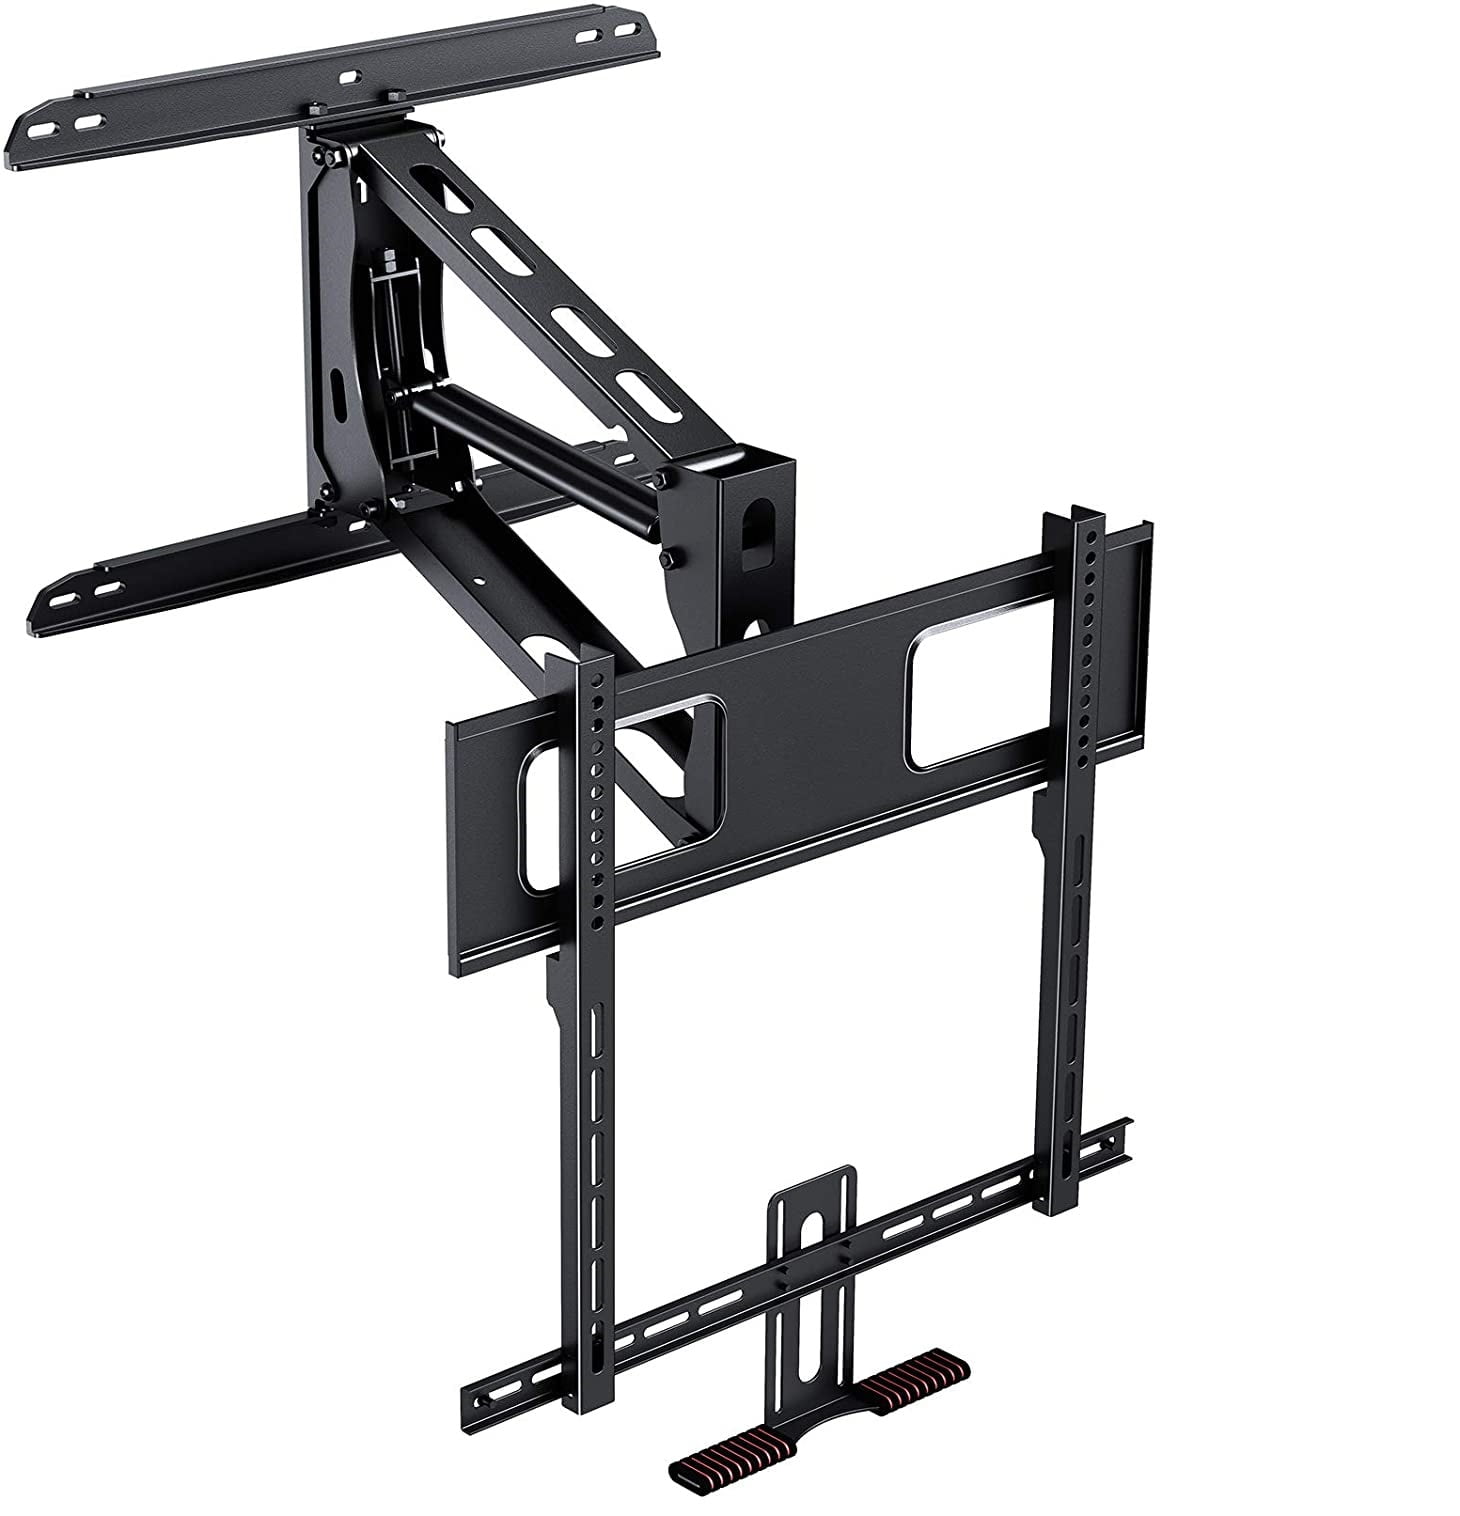 PERLESMITH Full Motion TV Mount for 42-70 inch Flat/Curved TVs - Pull Down TV Mount Over Fireplace with Safety Gas Spring and Pull-Down Handle, Loading 33-99lbs, 16 Inch Studs